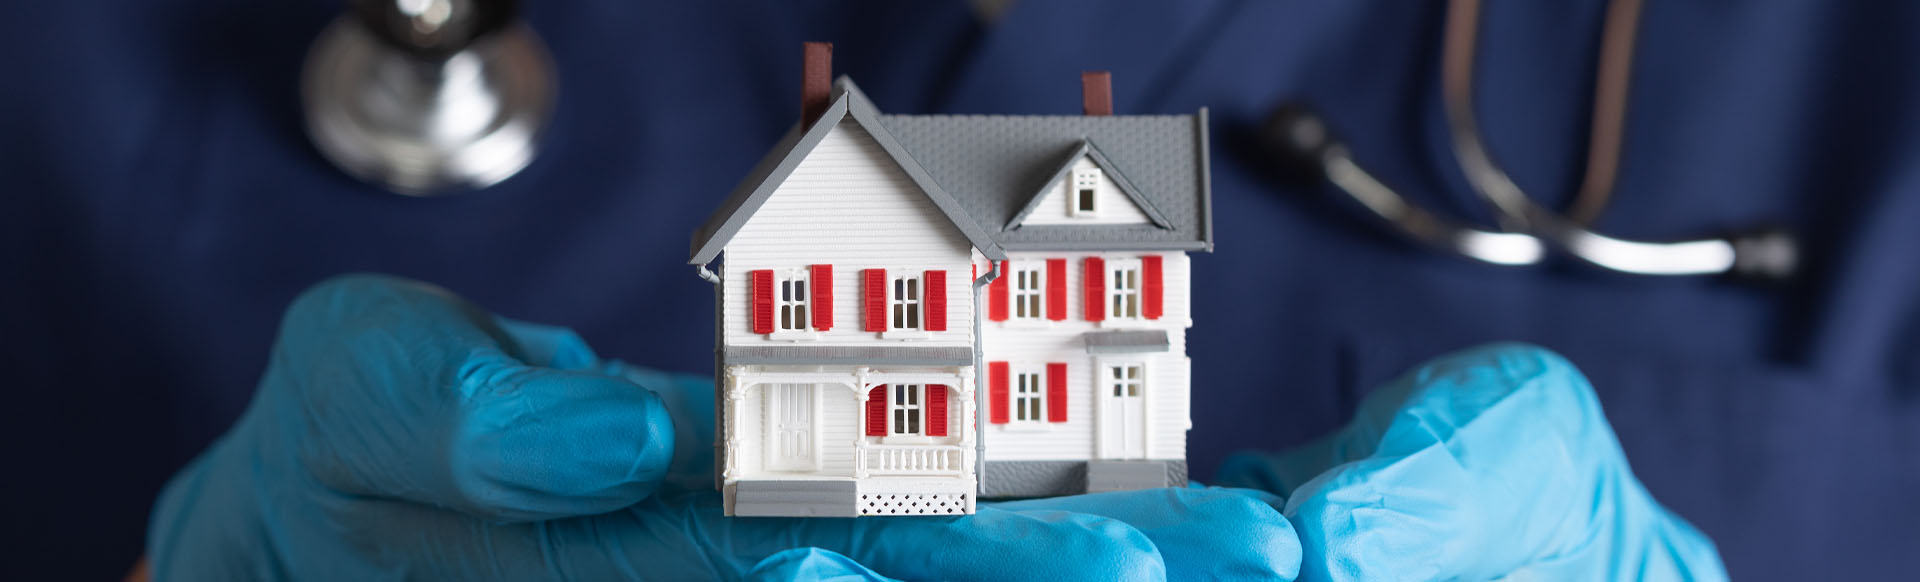 Image showing a close up of a doctor wearing gloves and holding a model house